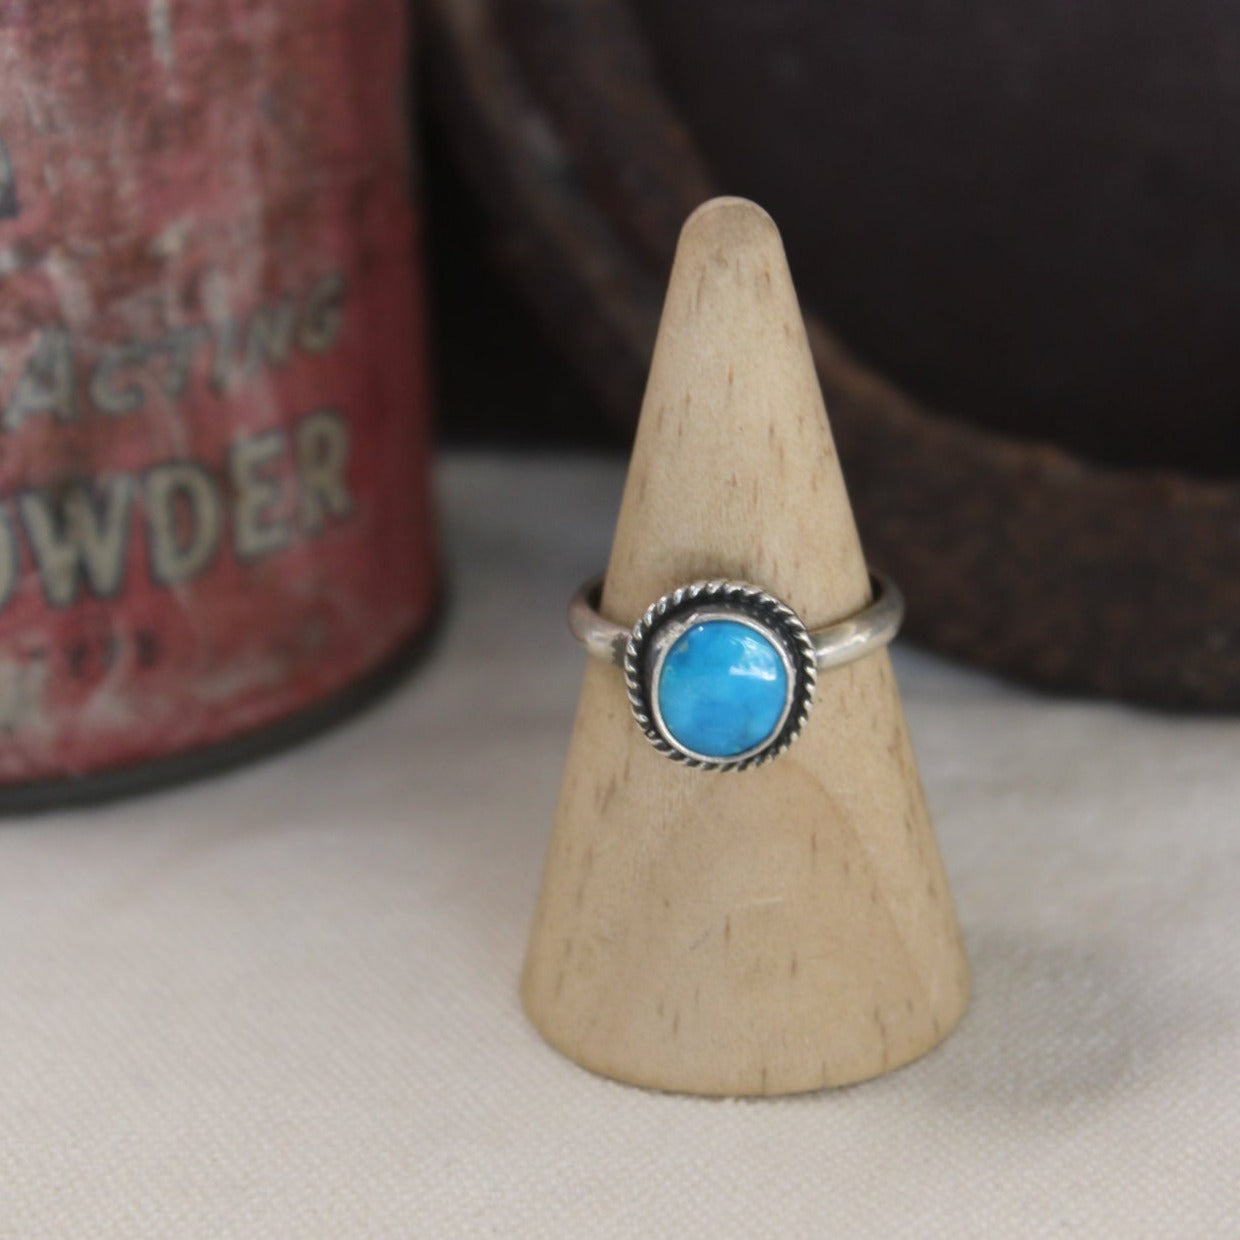 Turquoise Ring - One